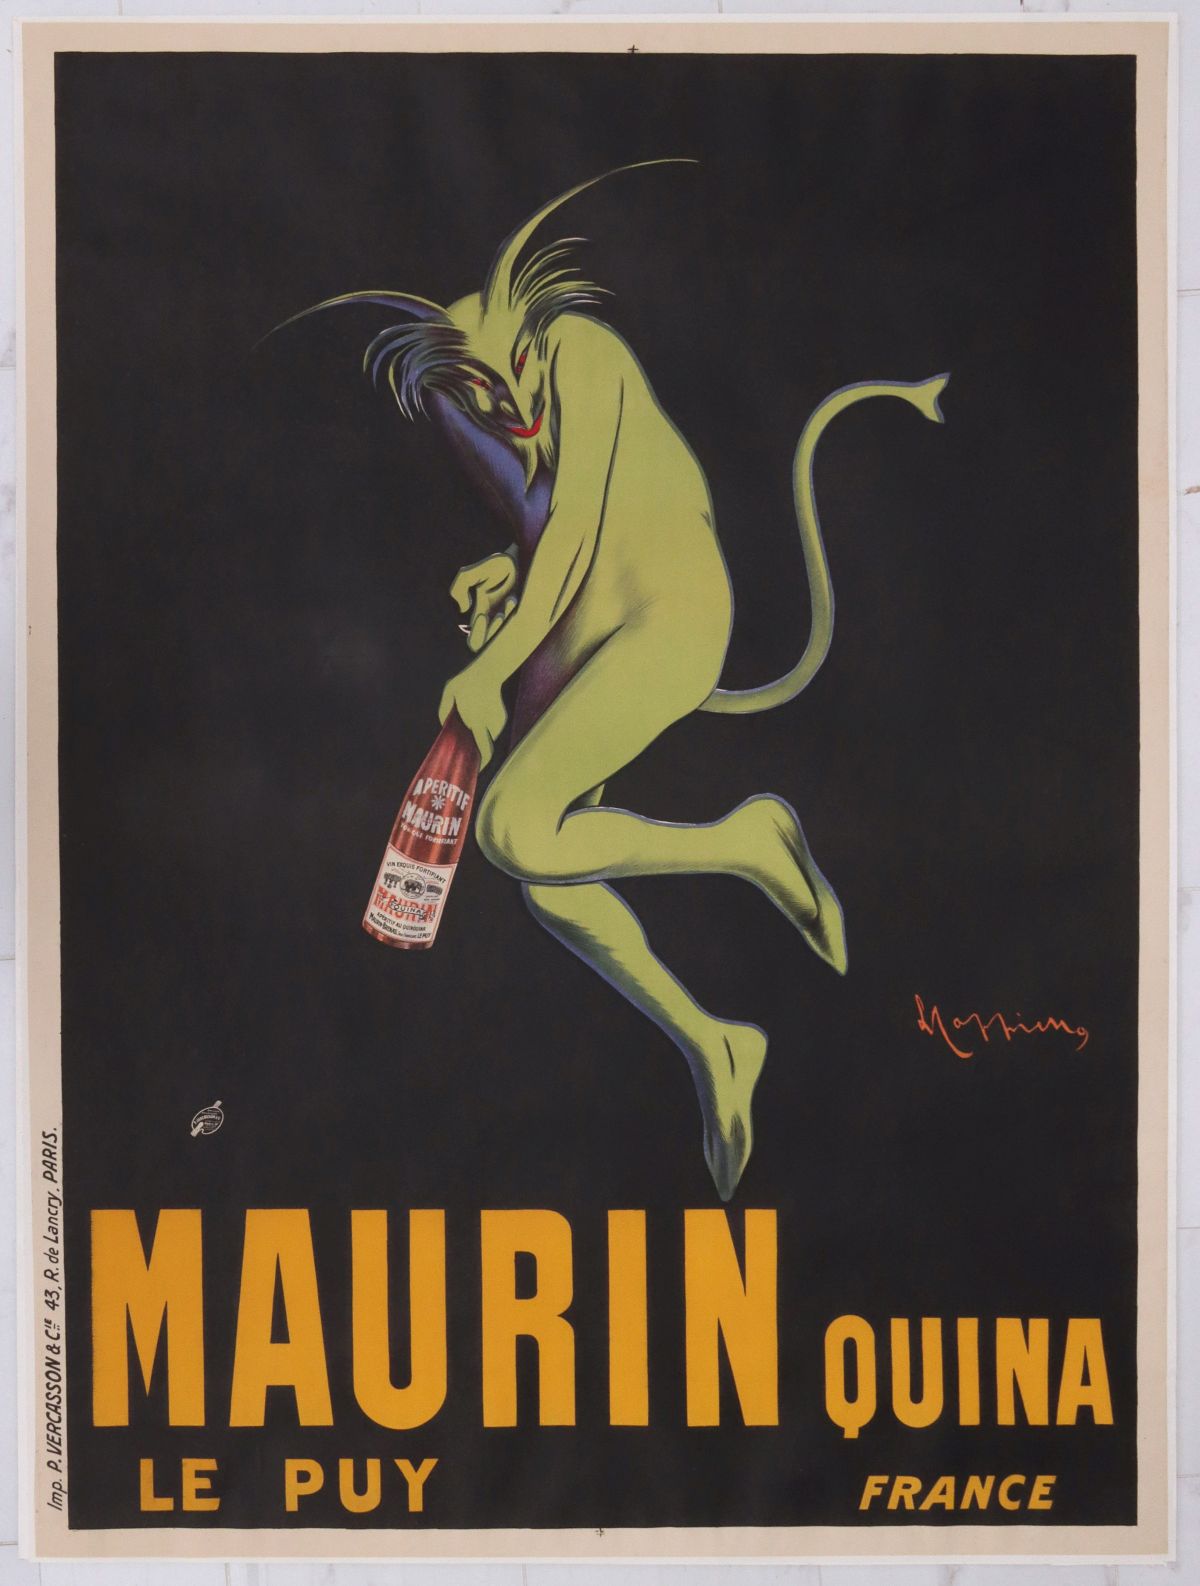 A 1906 MAURIN QUINA FRENCH LITHOGRAPH POSTER